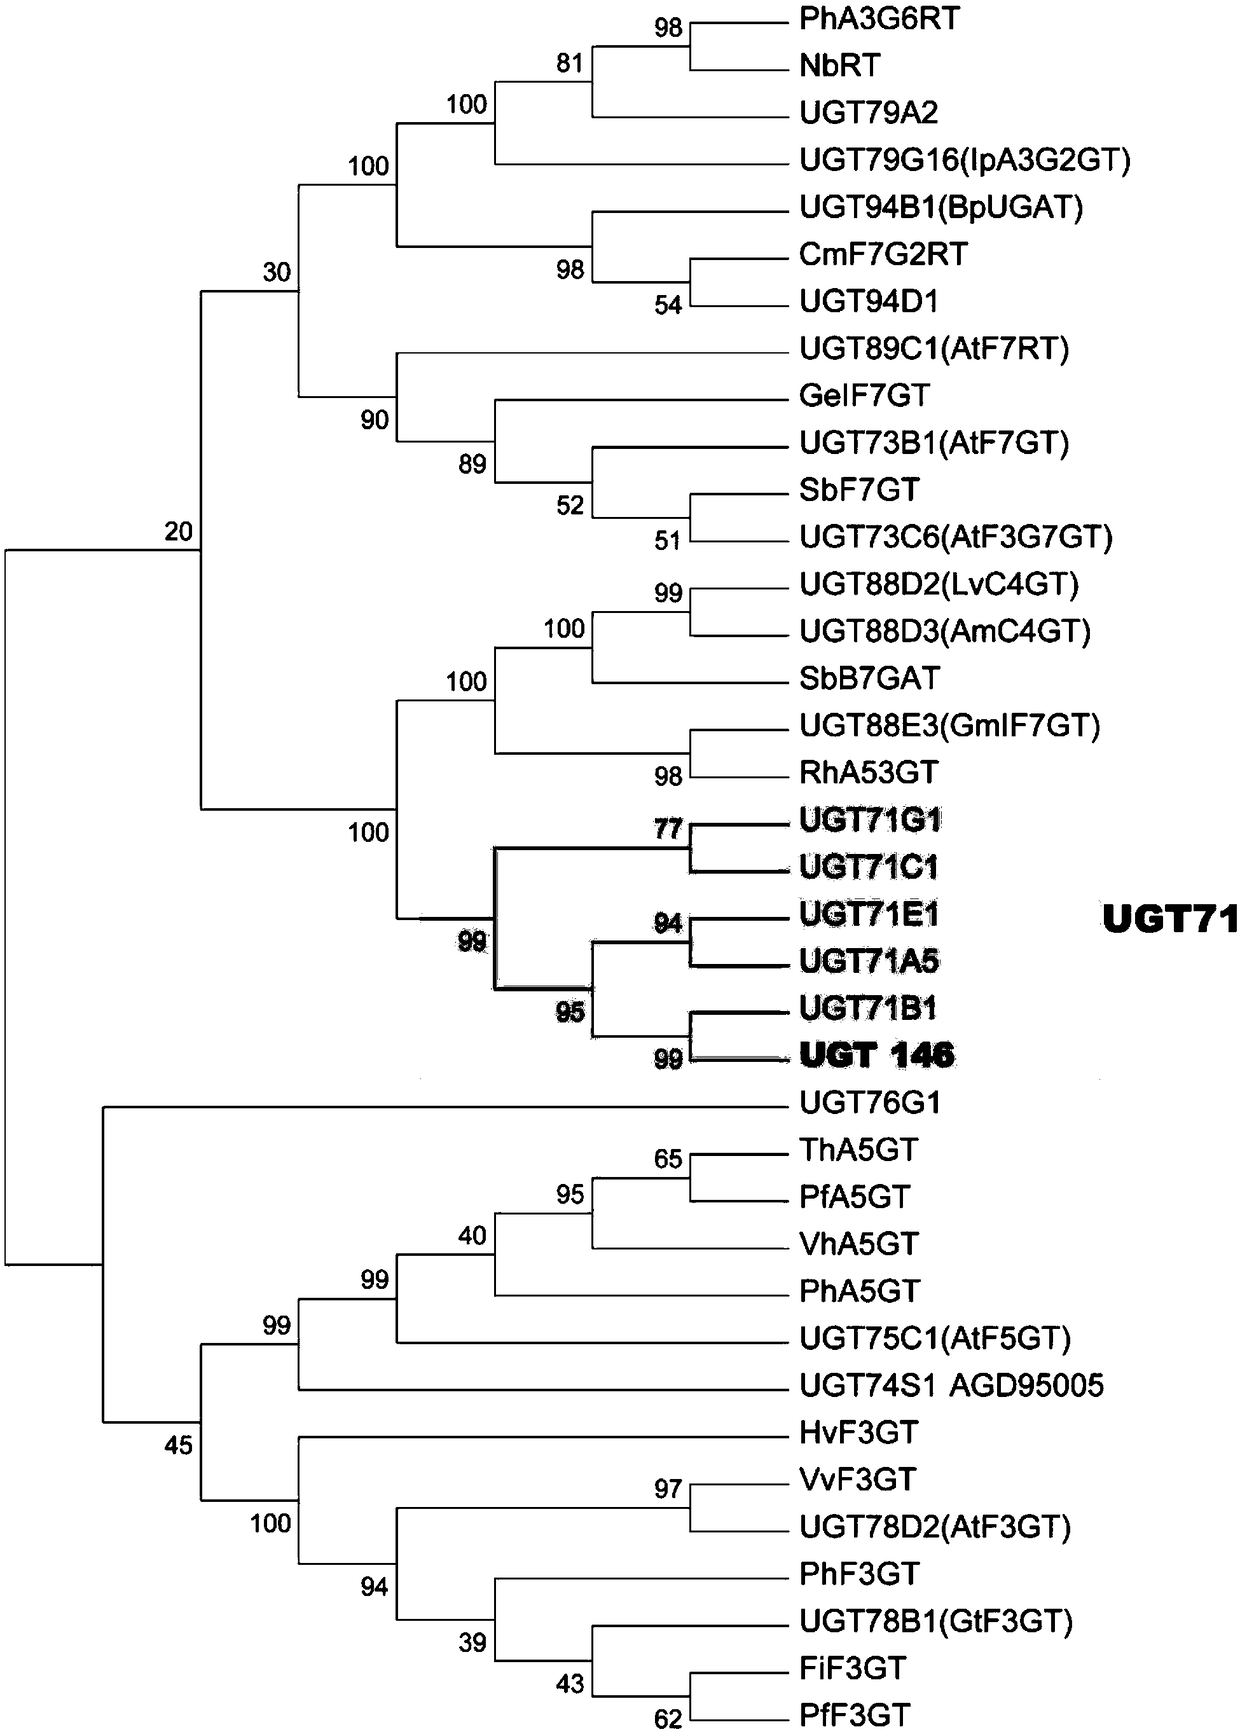 Protein UGT146 as well as coding genes and application thereof